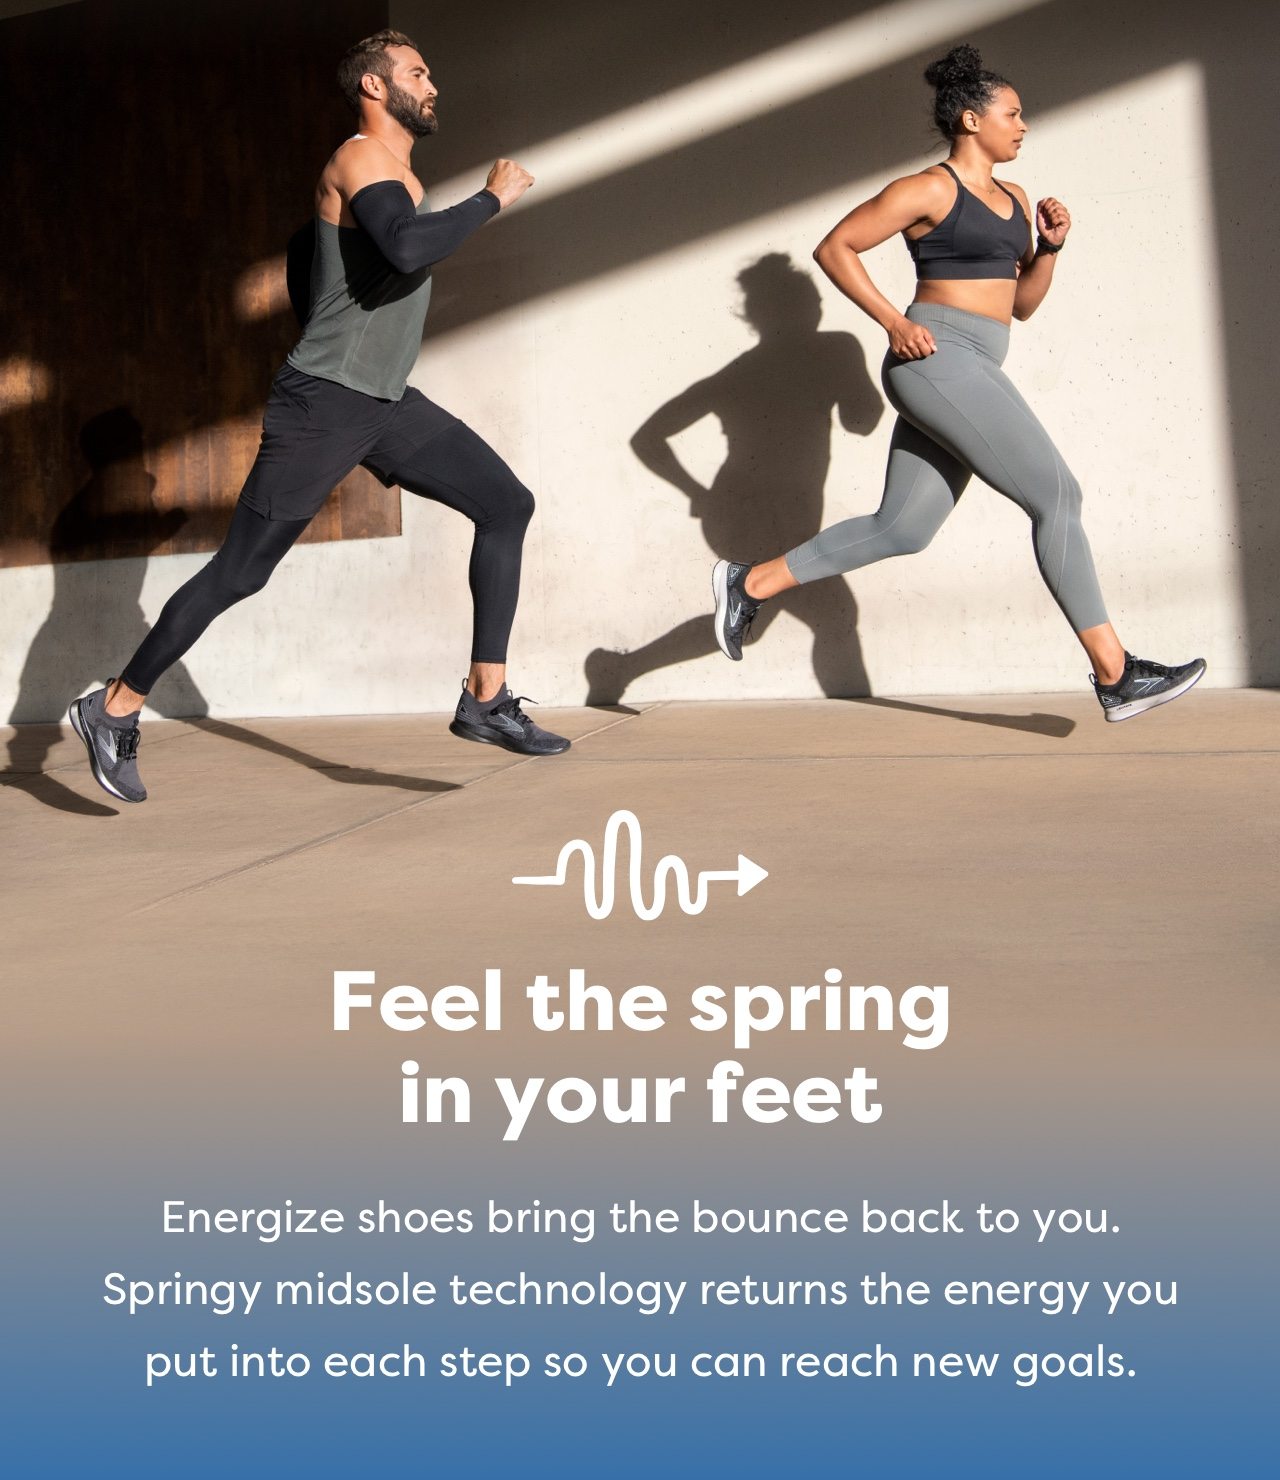 Feel the spring in your feet | Energize shoes bring the bounce back to you. Springy midsole technology returns the energy you put into each step so you can reach new goals.